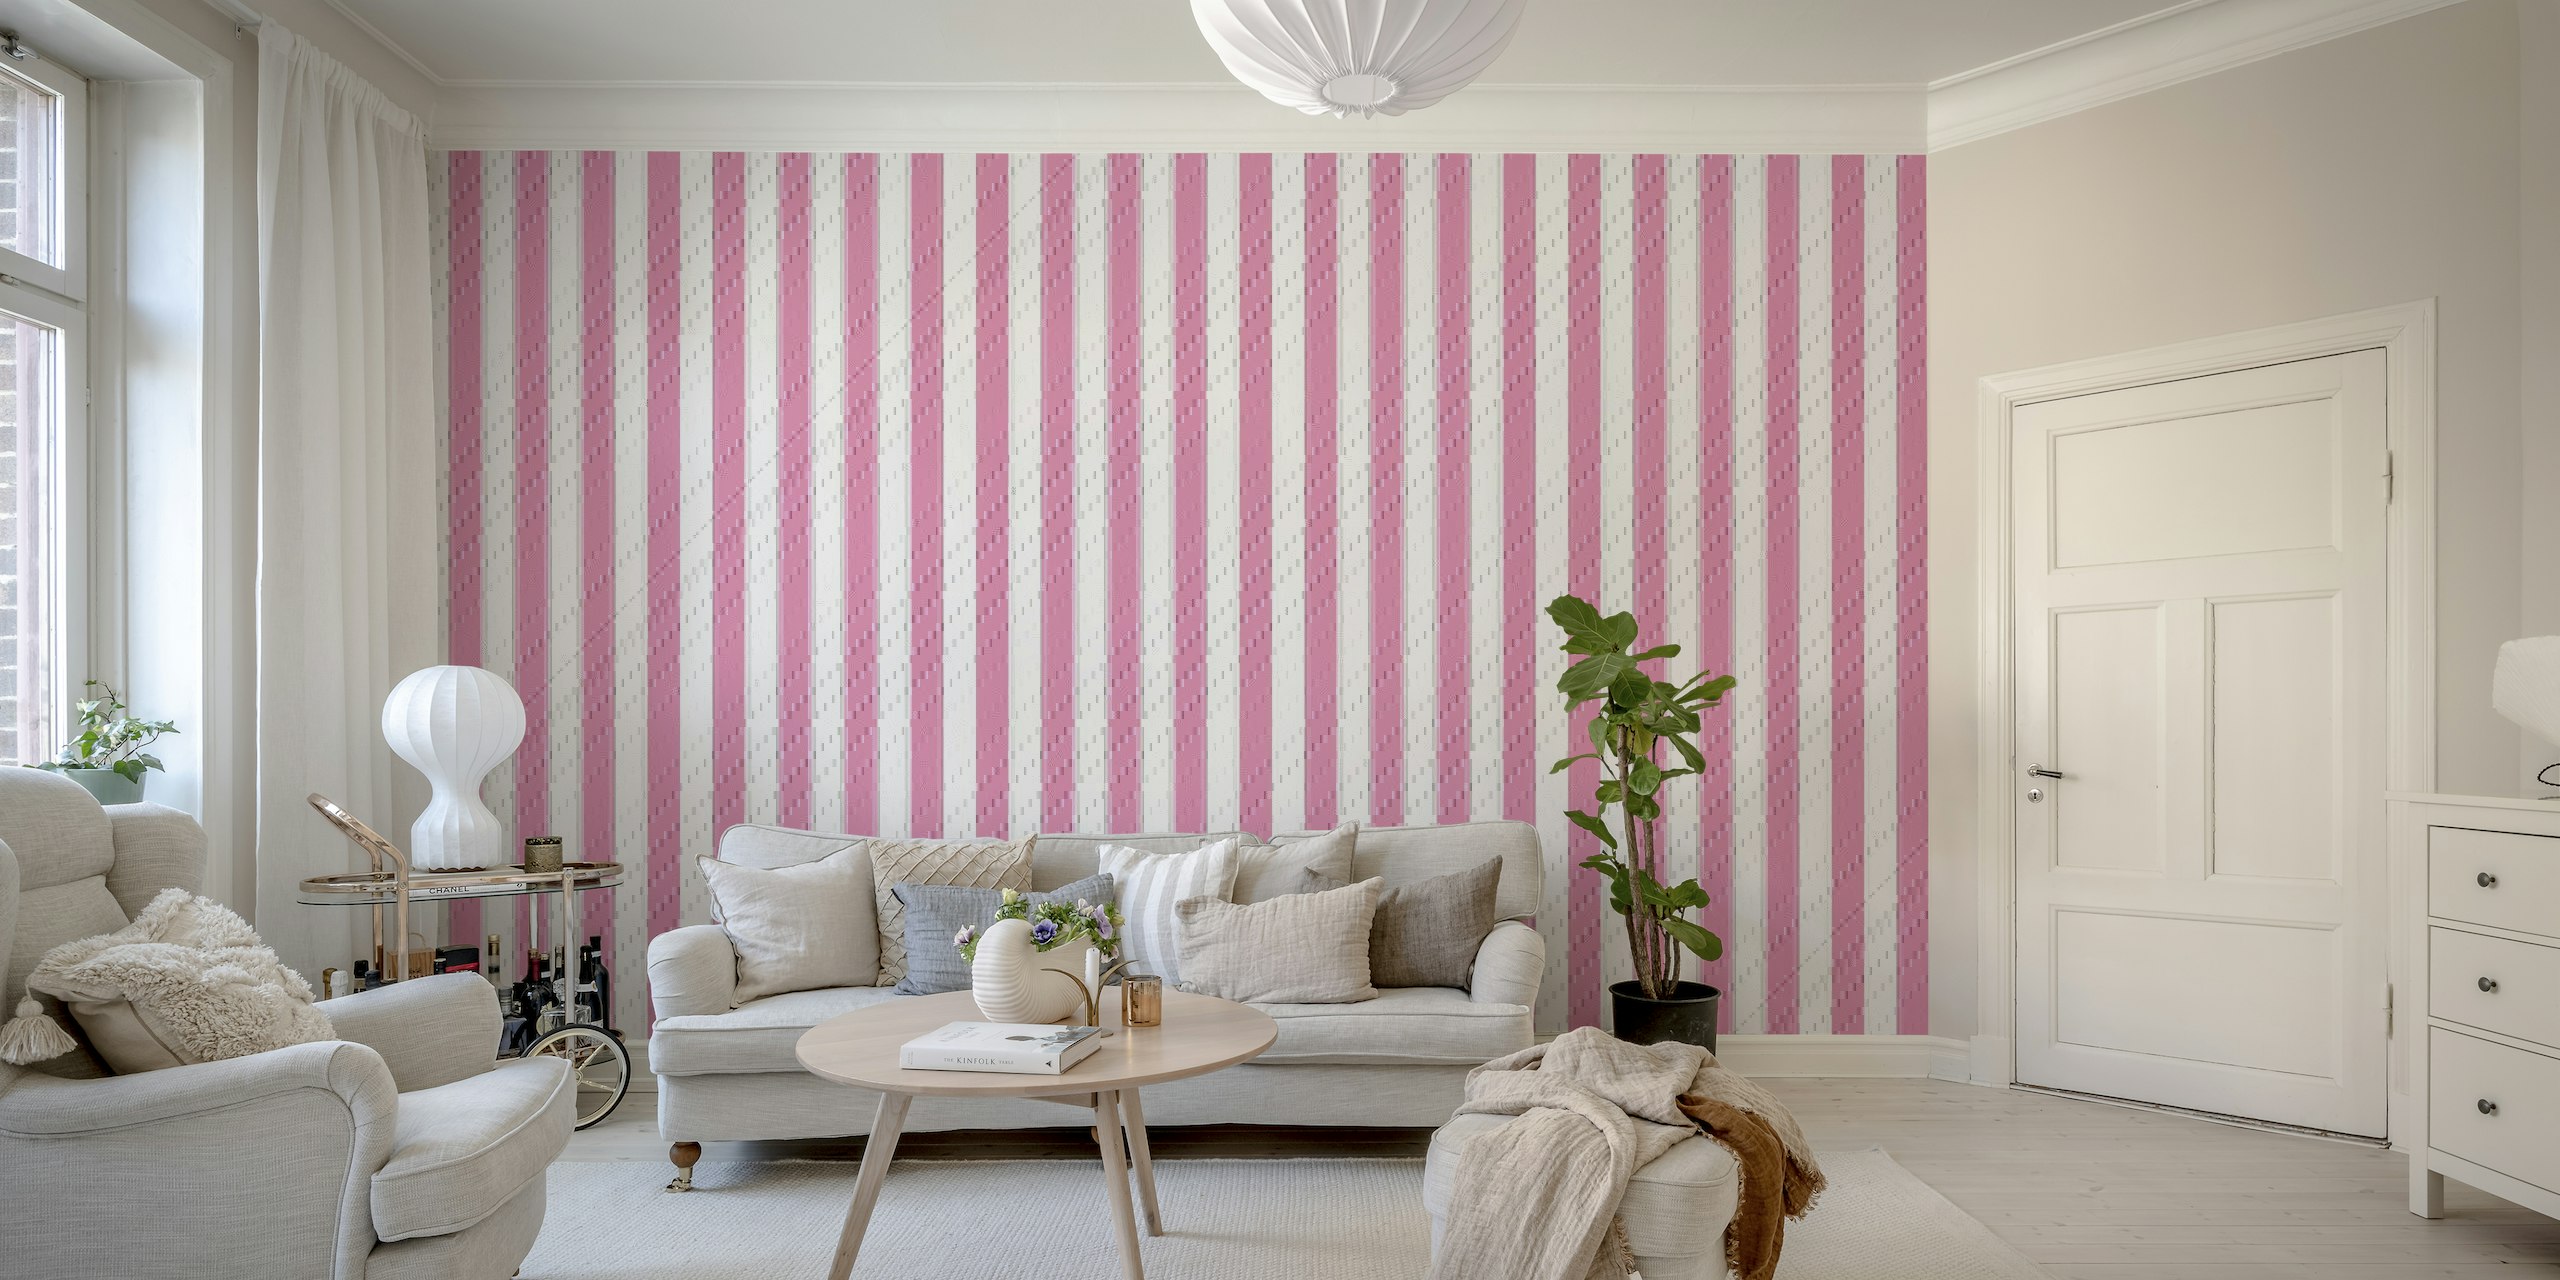 Baby Doll Pink Stripes behang